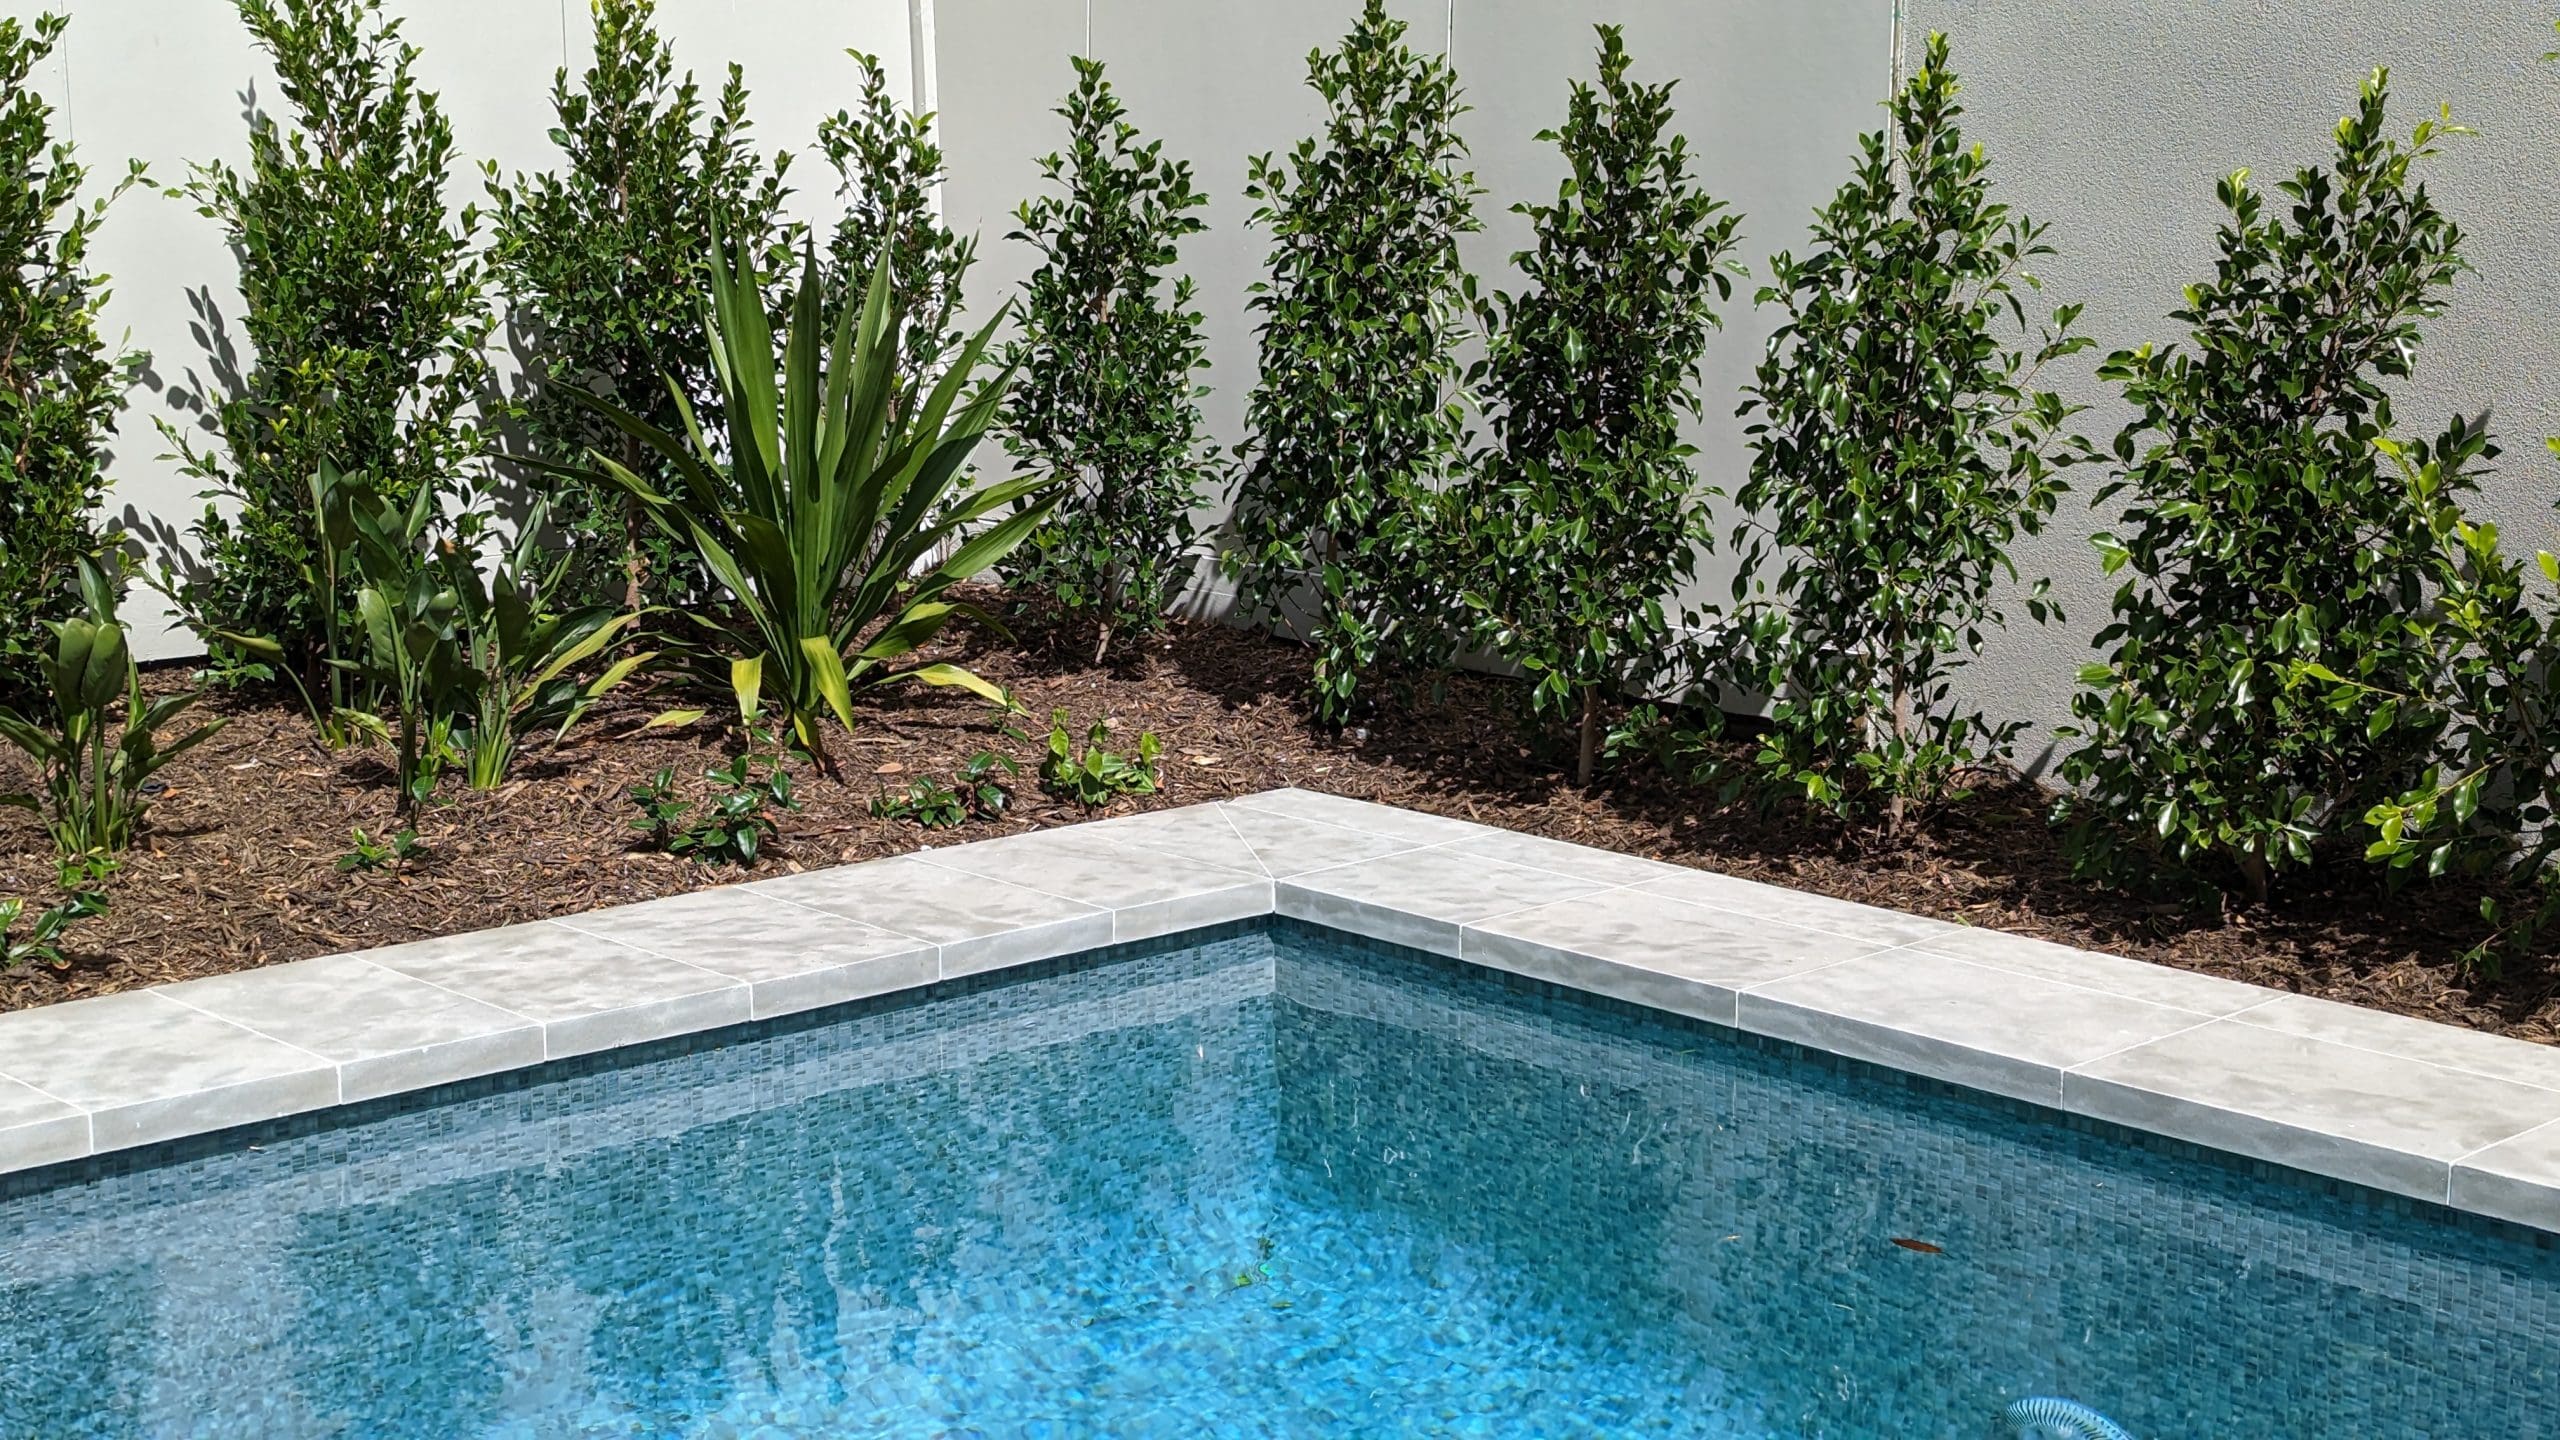 MADDISON BRUSHED & TUMBLED LIMESTONE_RMS TRADERS_NATURAL STONE GREY PAVERS POOL COPING TILES SUPPLIER MELBOURNE (19)